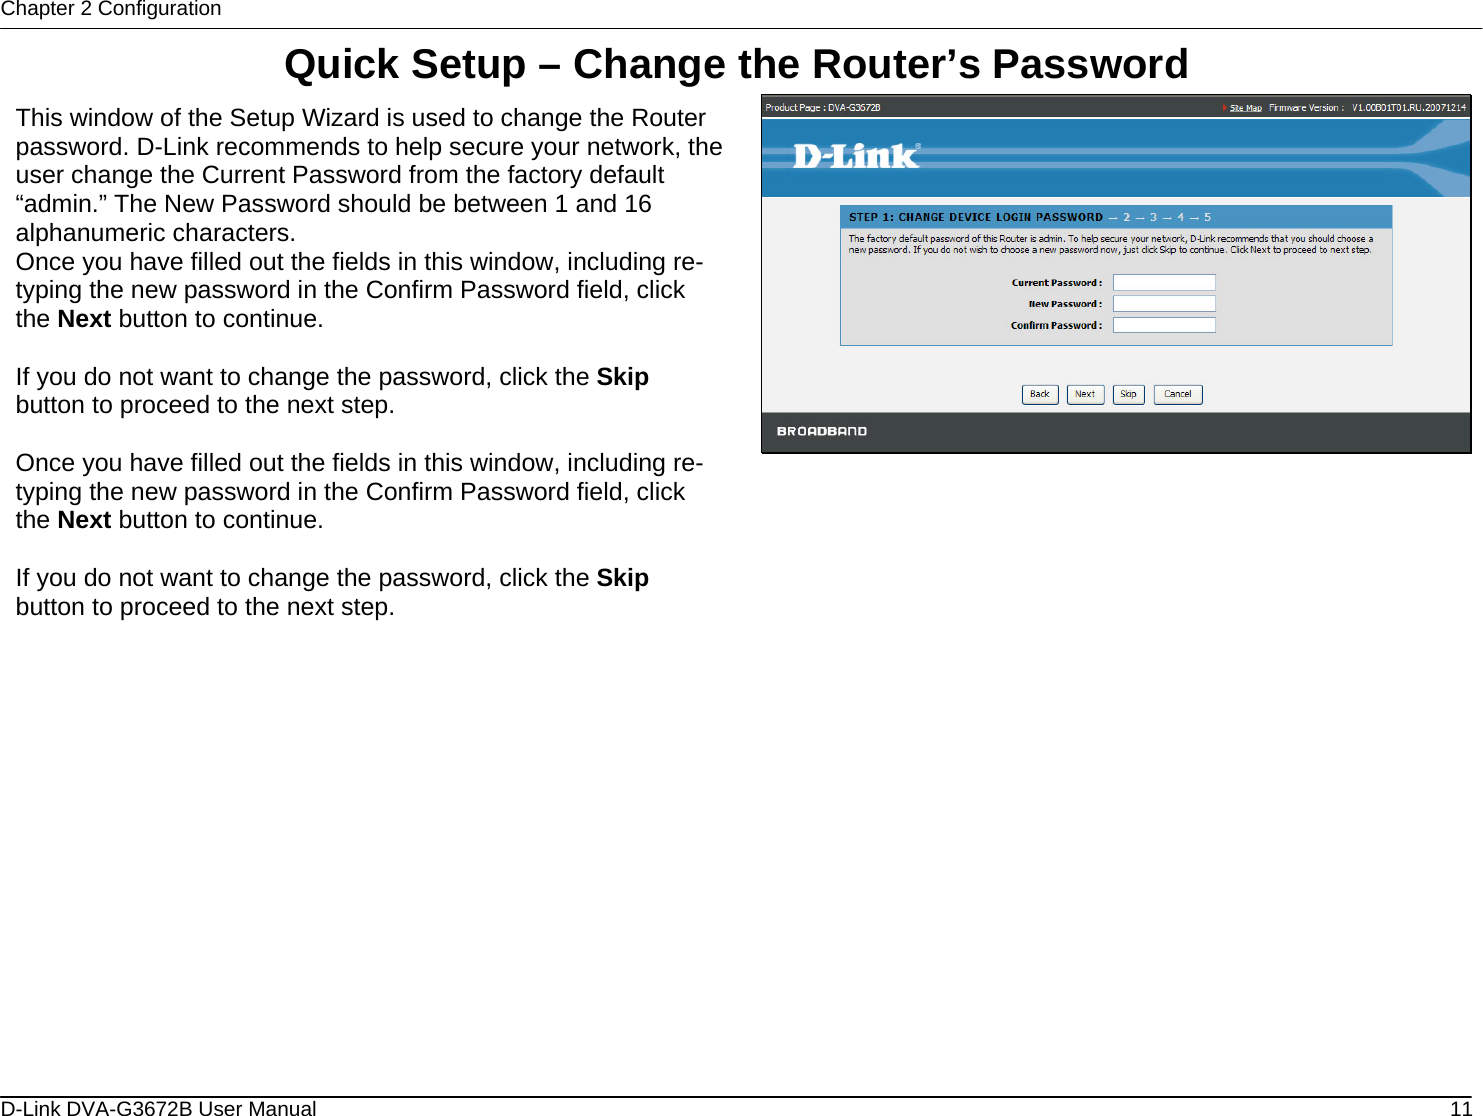 Chapter 2 Configuration Quick Setup – Change the Router’s Password  This window of the Setup Wizard is used to change the Router password. D-Link recommends to help secure your network, the user change the Current Password from the factory default “admin.” The New Password should be between 1 and 16 alphanumeric characters. Once you have filled out the fields in this window, including re-typing the new password in the Confirm Password field, click the Next button to continue.  If you do not want to change the password, click the Skip button to proceed to the next step.  Once you have filled out the fields in this window, including re-typing the new password in the Confirm Password field, click the Next button to continue.  If you do not want to change the password, click the Skip button to proceed to the next step.                      D-Link DVA-G3672B User Manual  11